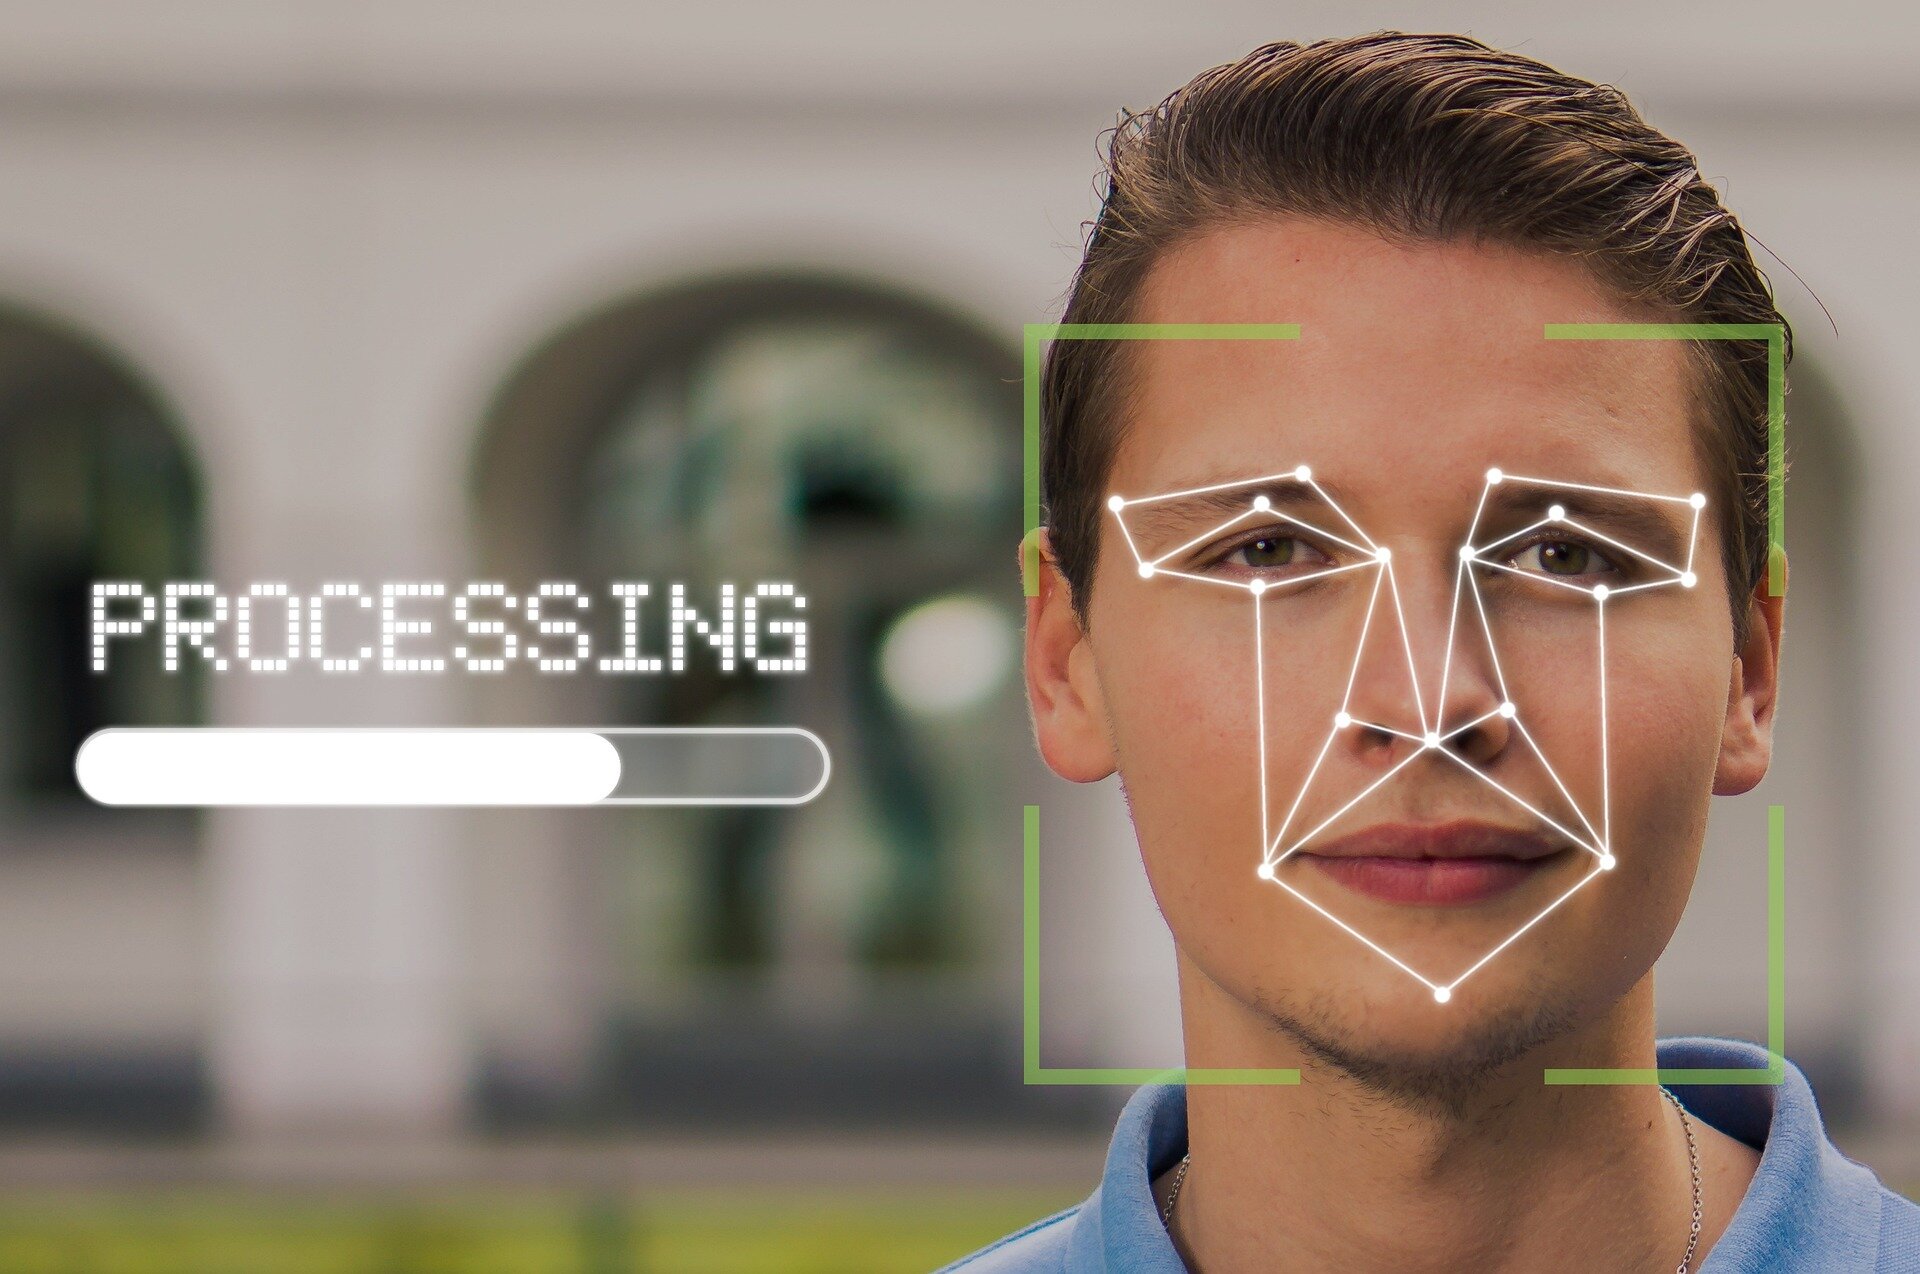 Testing of super-recognizers shows some have truly remarkable abilities